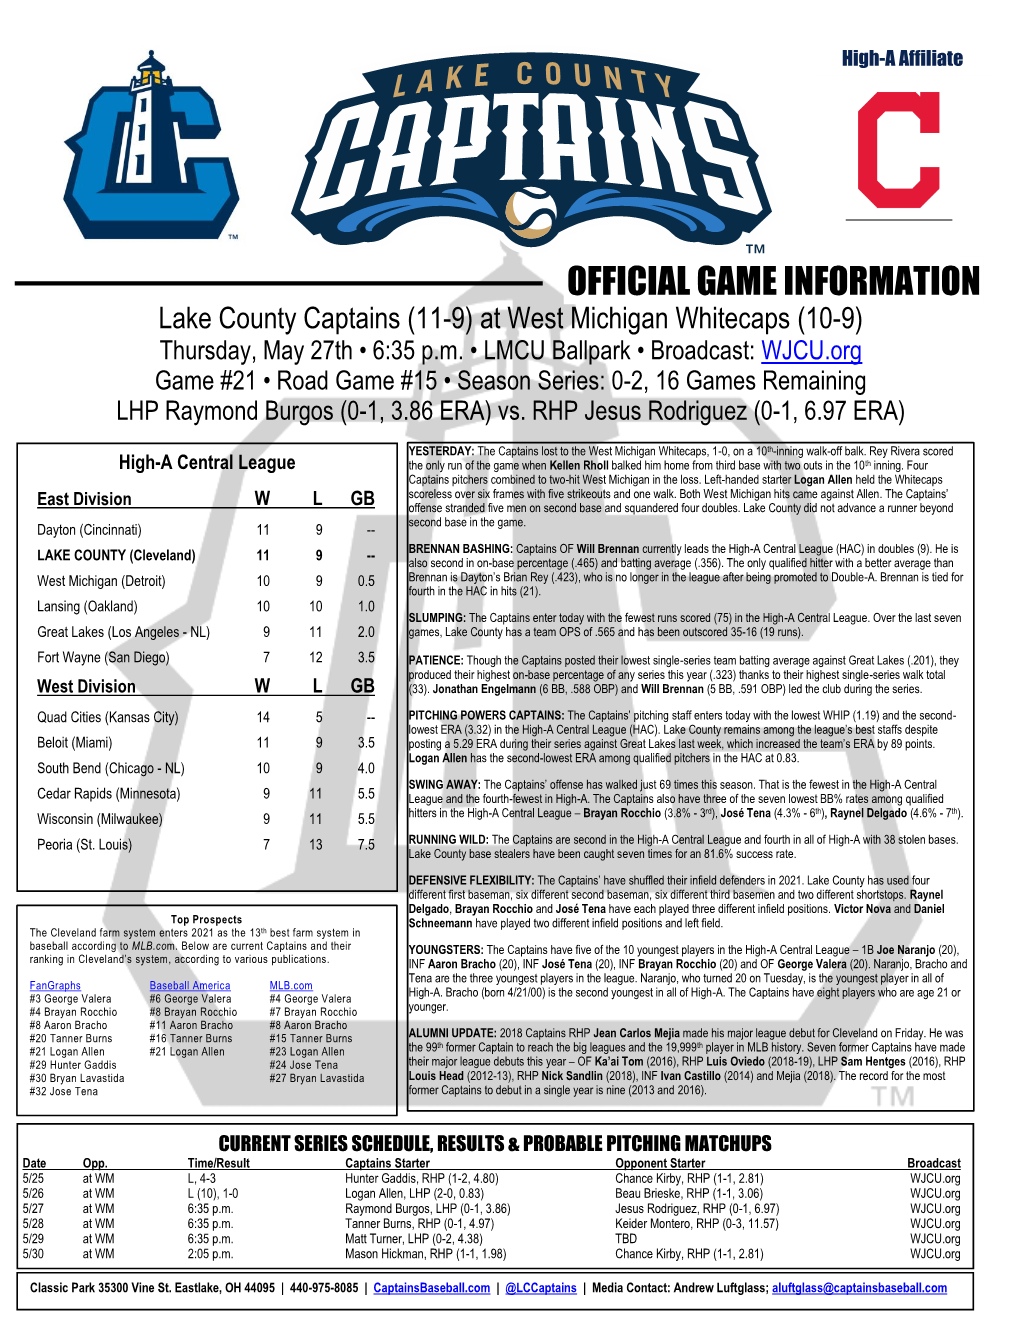 OFFICIAL GAME INFORMATION Lake County Captains (11-9) at West Michigan Whitecaps (10-9) Thursday, May 27Th • 6:35 P.M